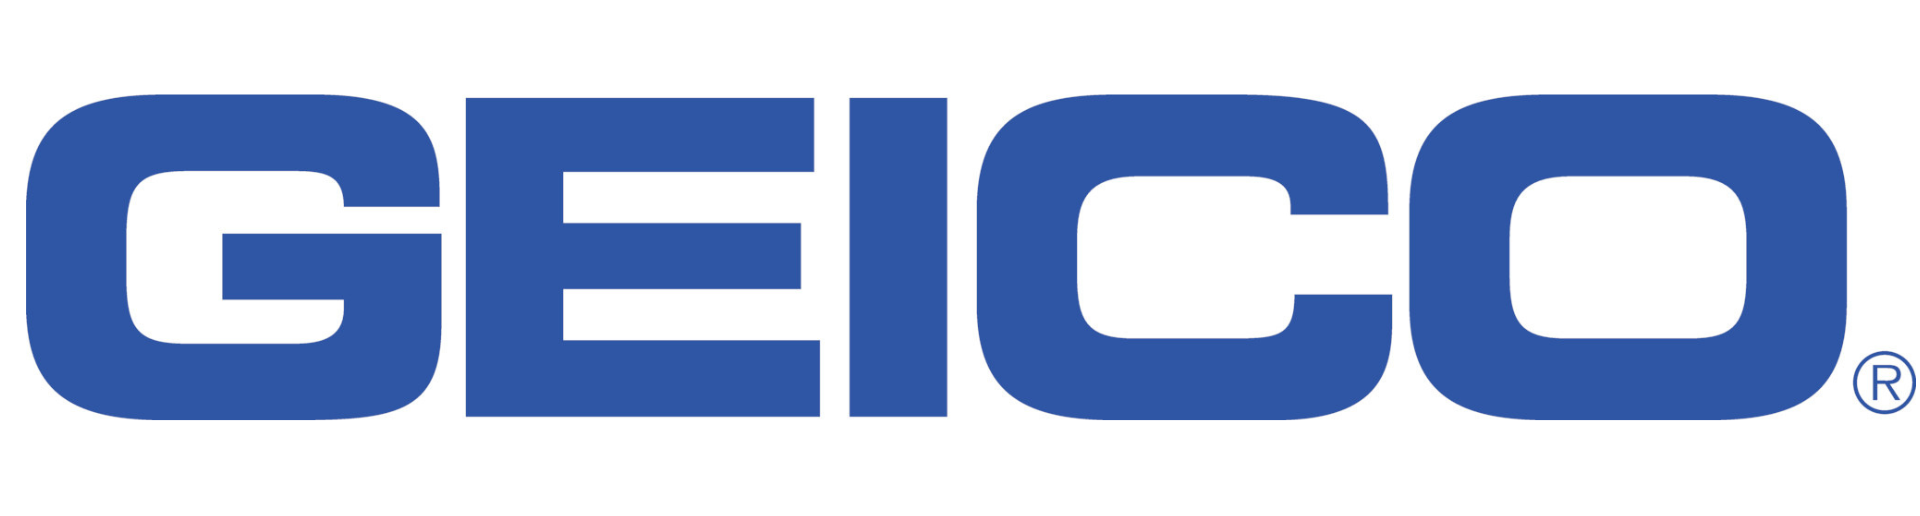 Thank you to our presenting sponsor, GEICO!